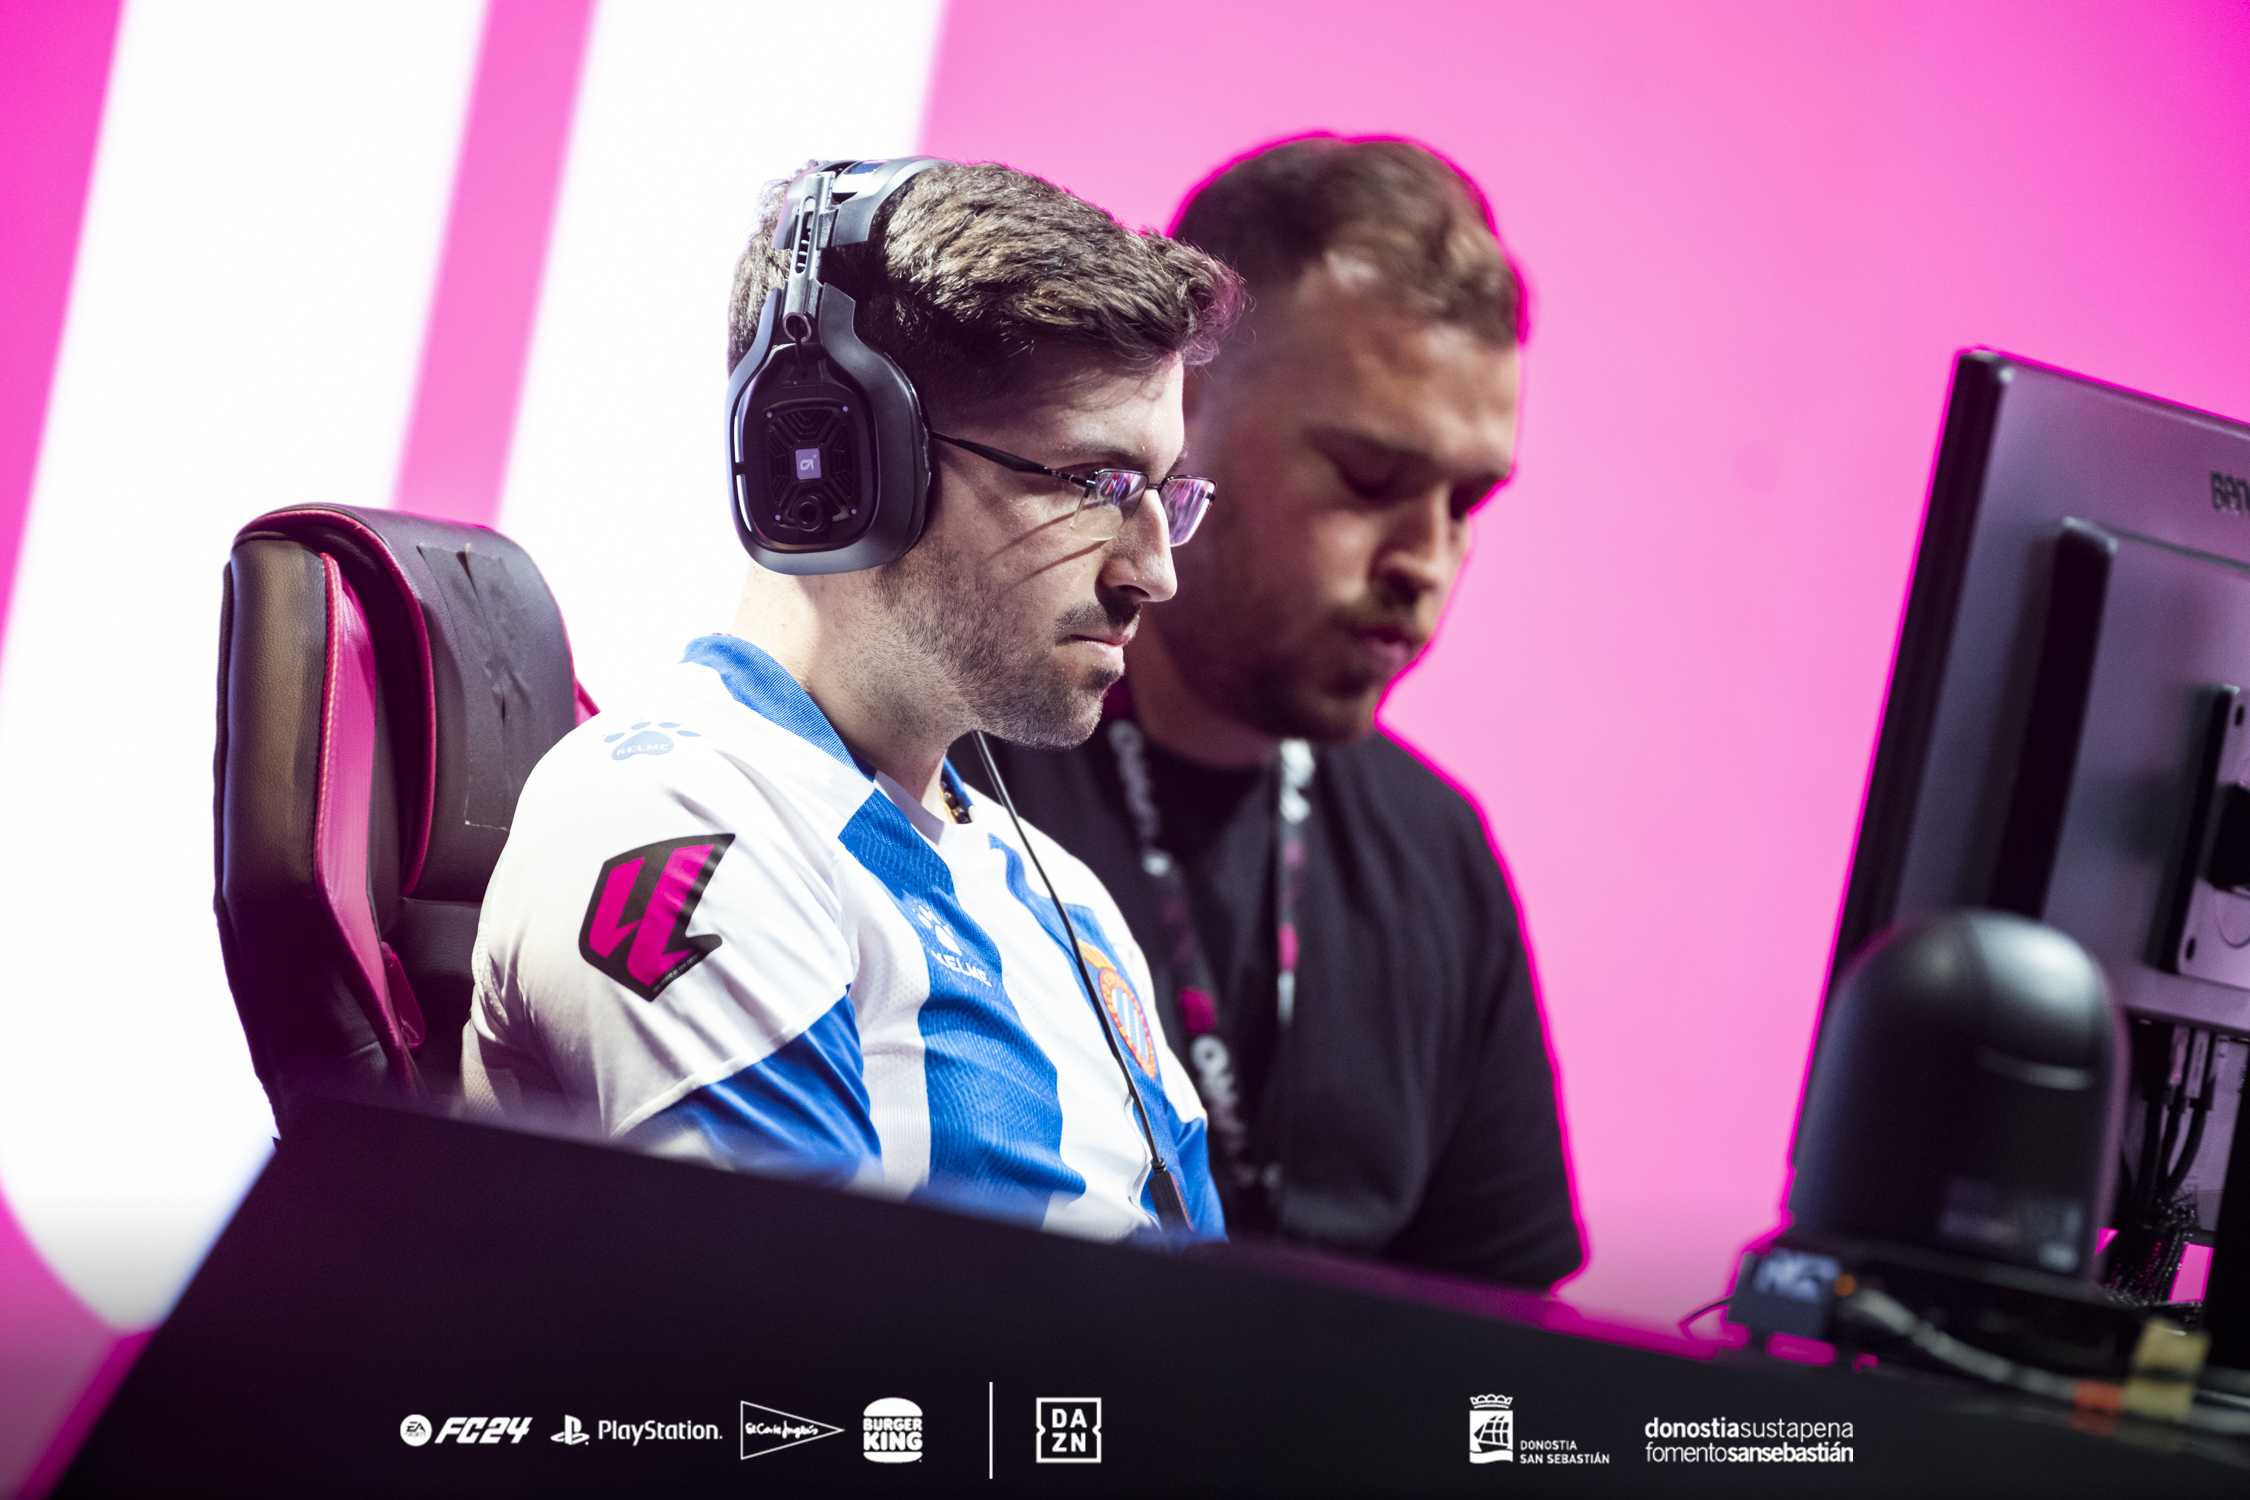 RCDeSports compete in the LALIGA FC Pro CUP